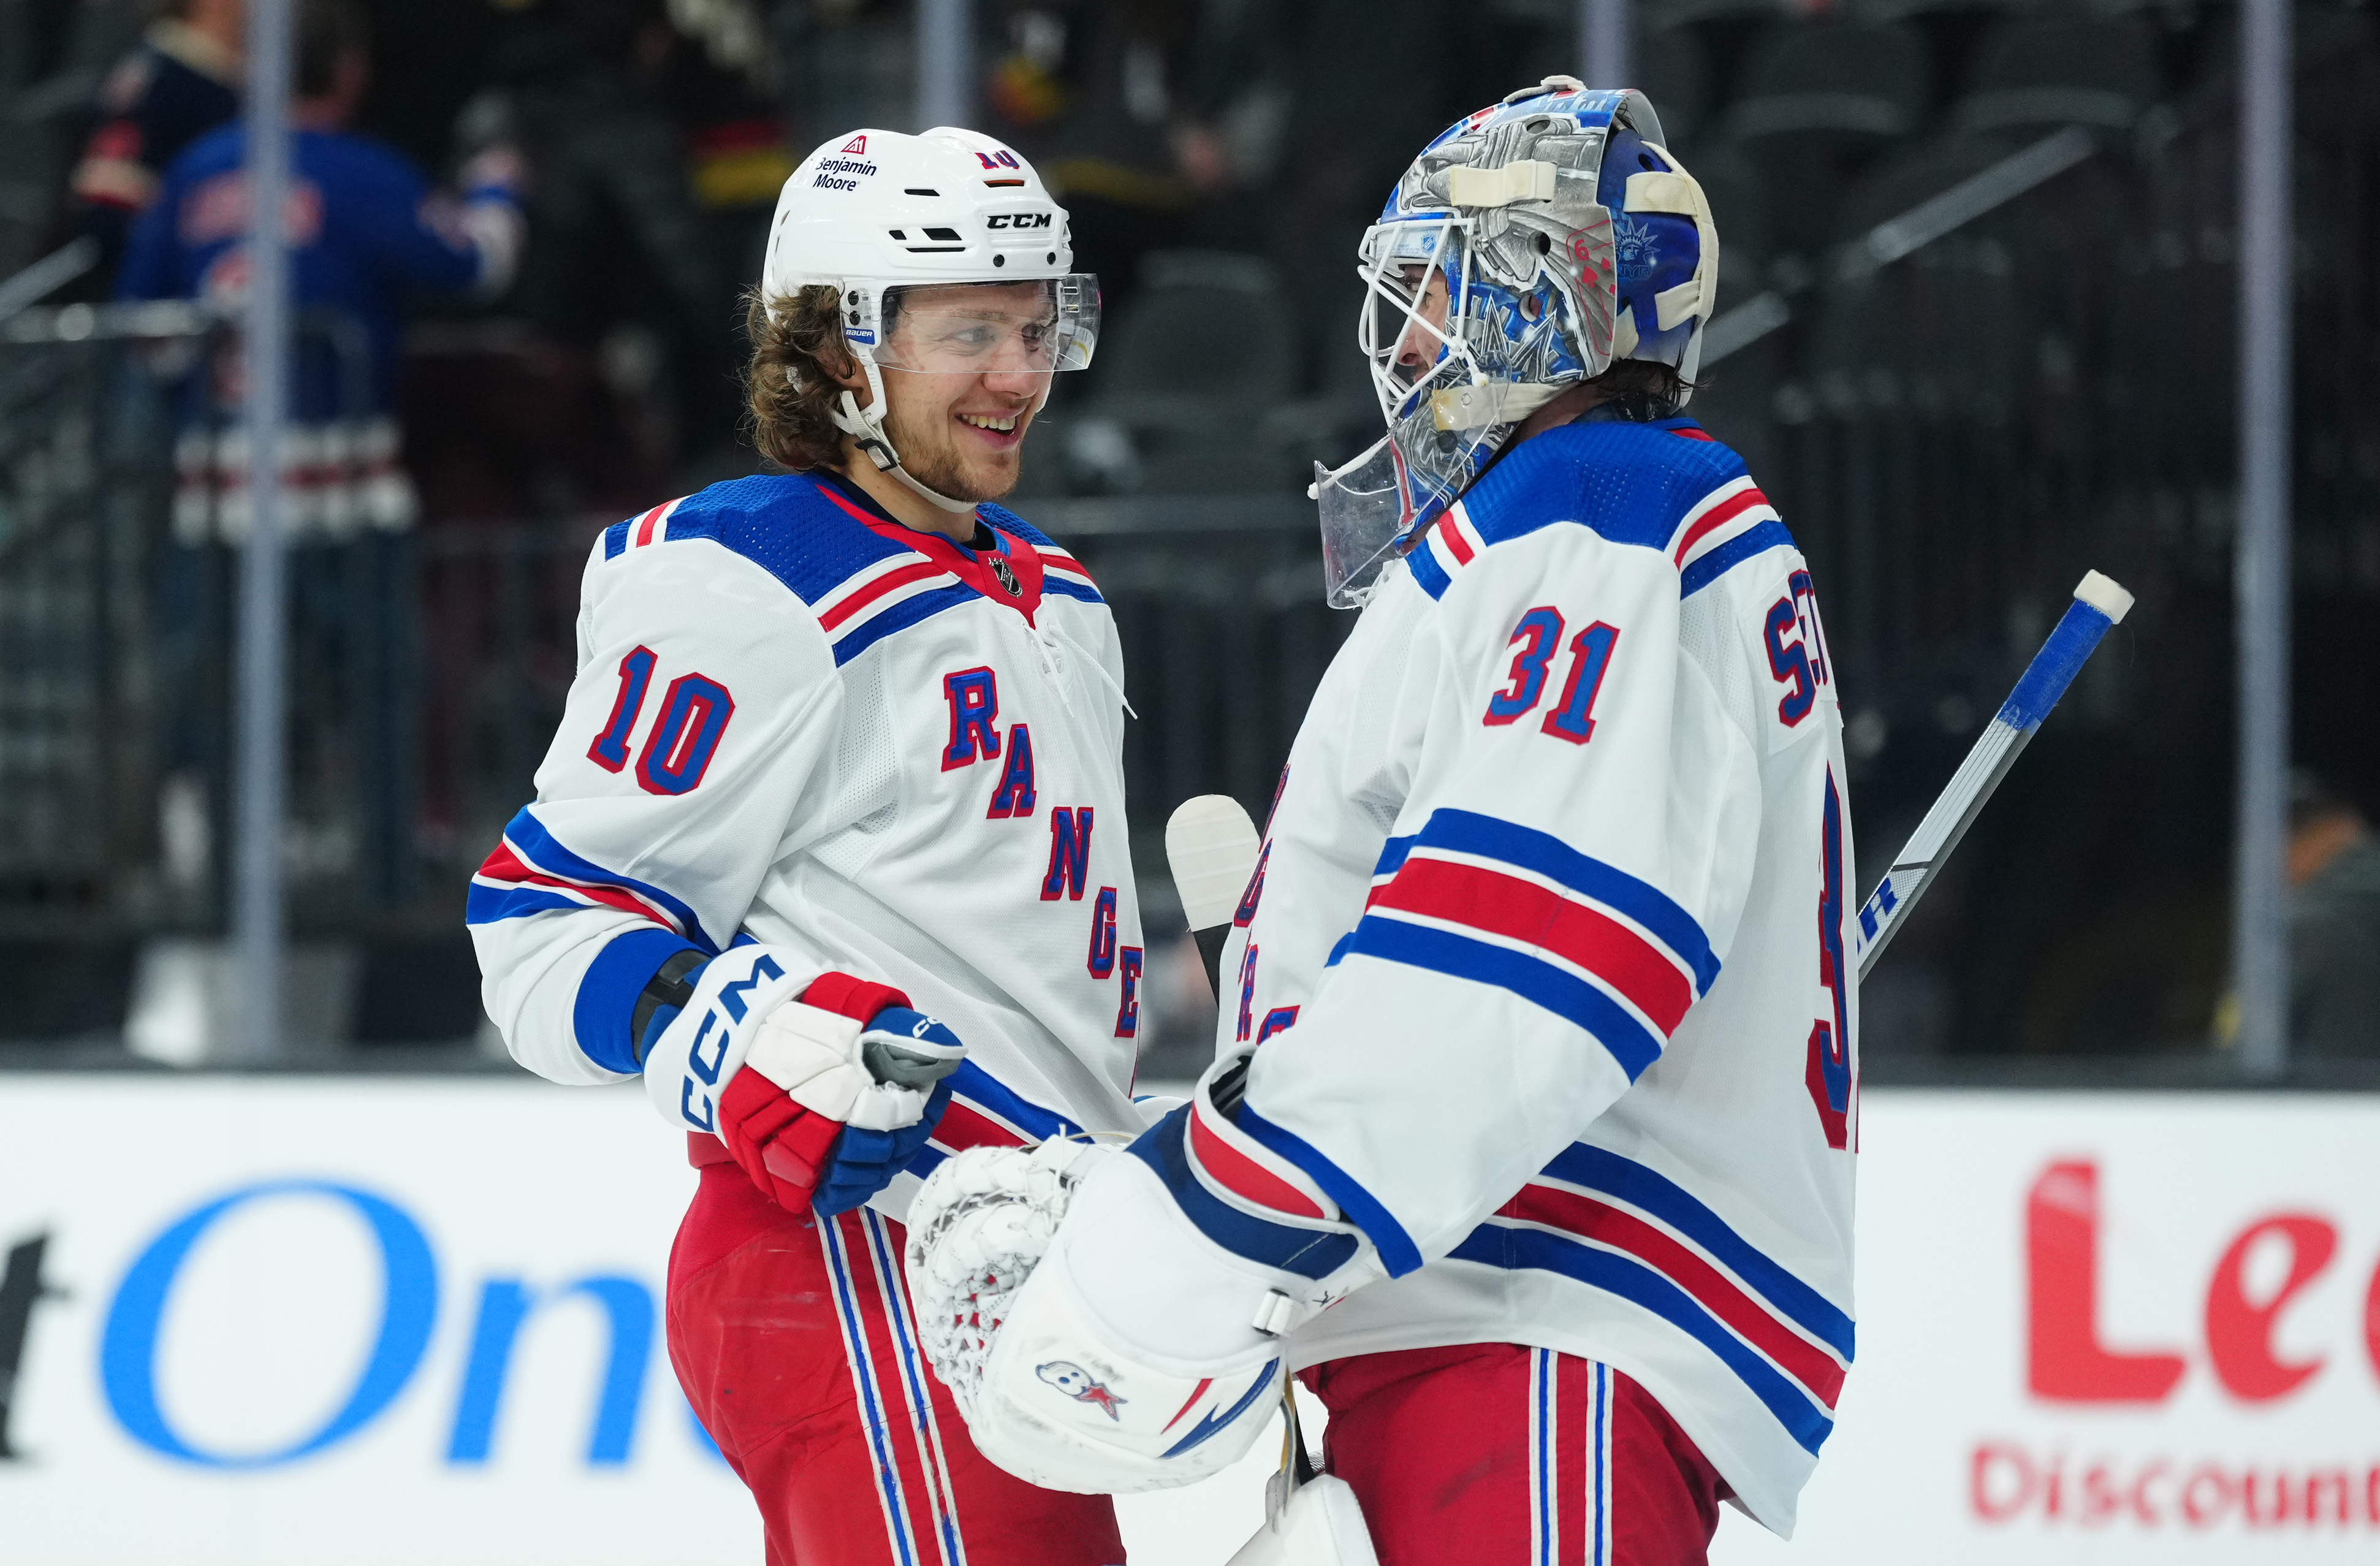 New York Rangers on X: “We can hang with the big boys. We are one